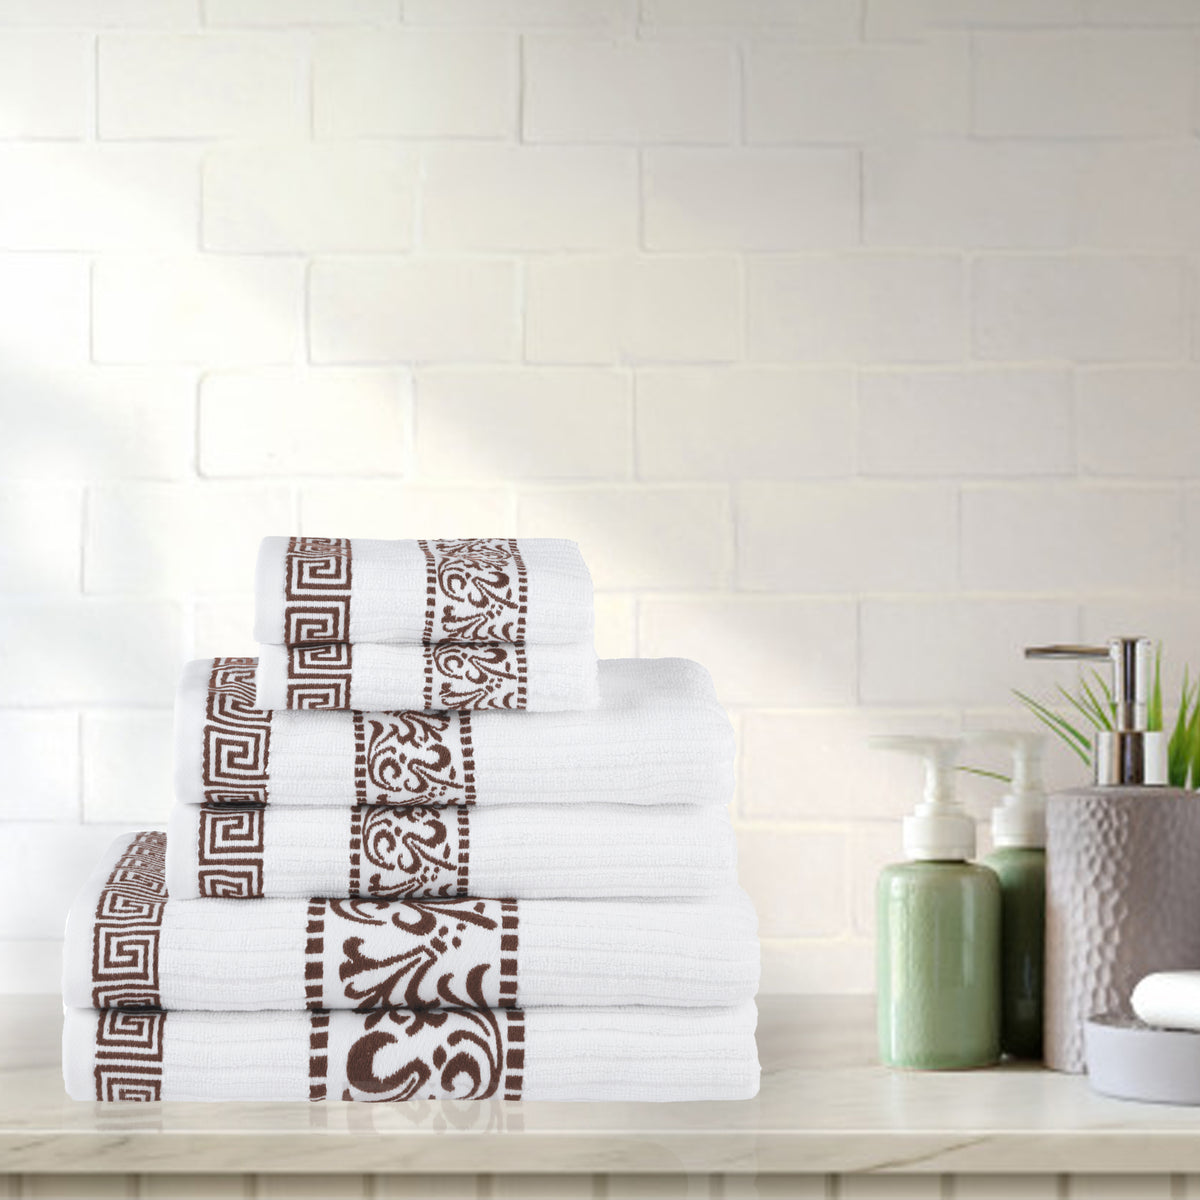 Superior Athens Cotton 6-Piece Assorted Towel Set with Greek Scroll and Floral Pattern - White-Chocolate